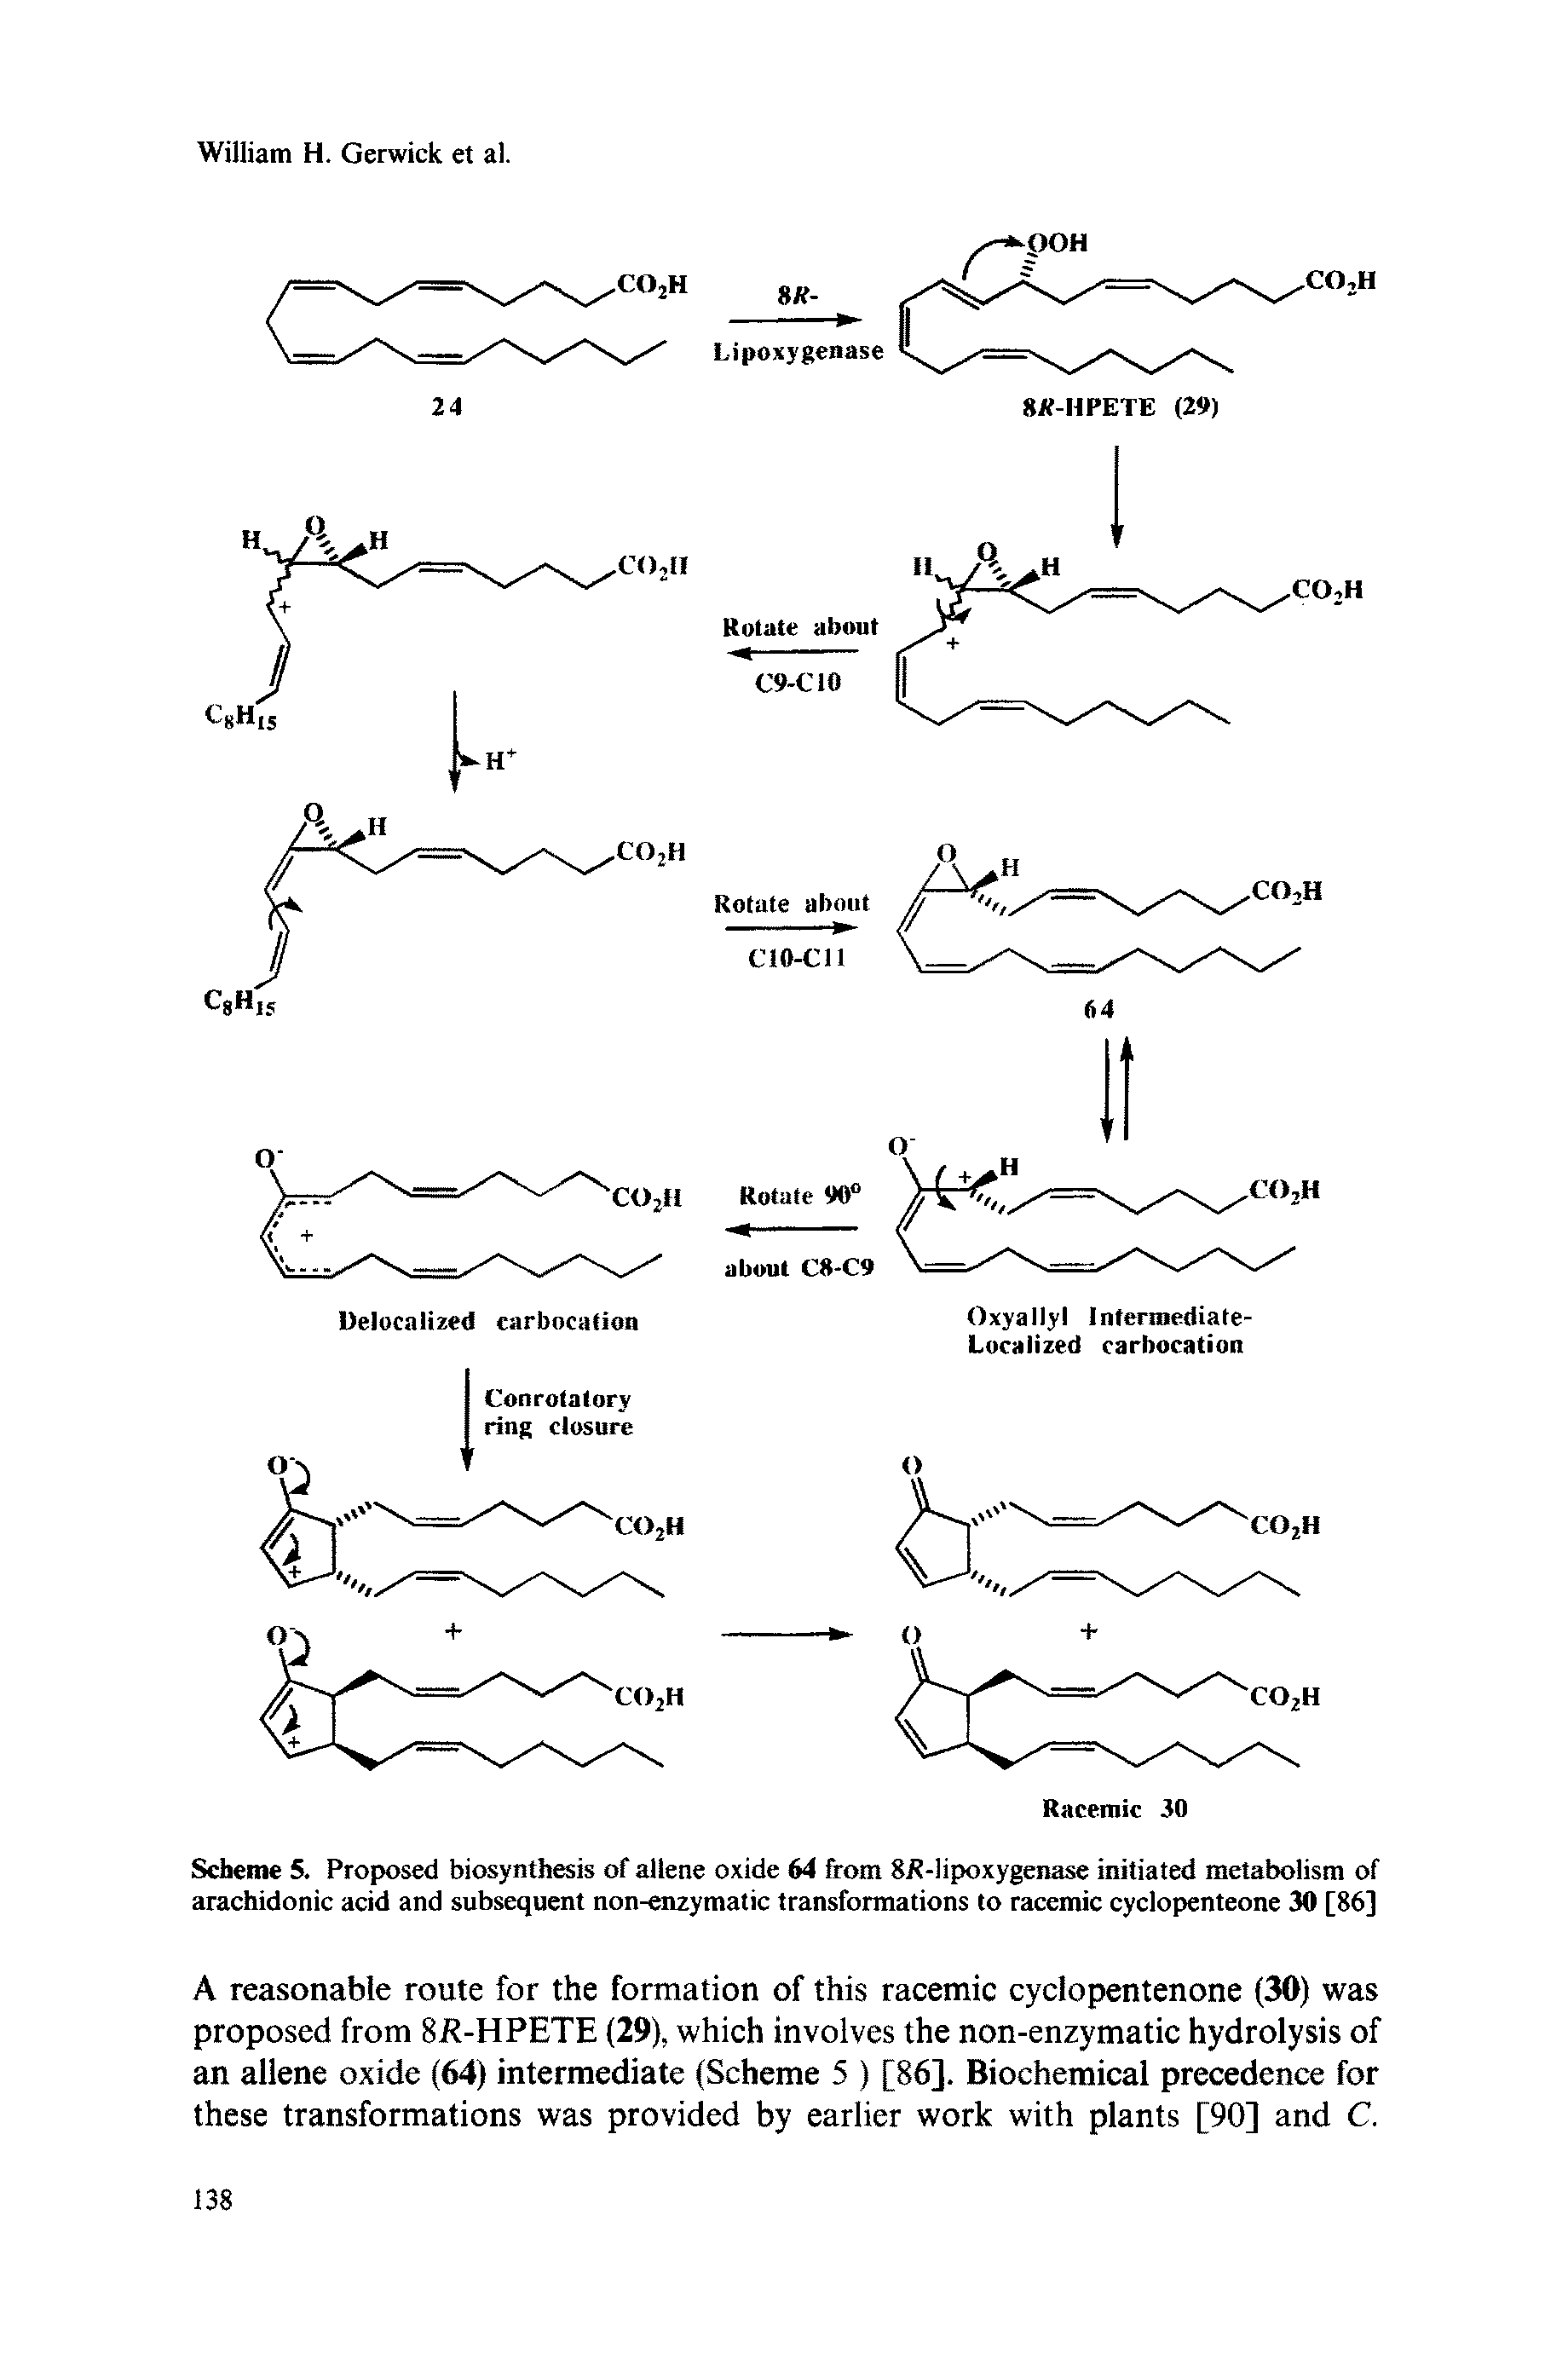 Scheme 5. Proposed biosynthesis of allene oxide 64 from 8i -lipoxygenase initiated metabolism of arachidonic acid and subsequent non-enzymatic transformations to racemic cyclopenteone 30 [86]...